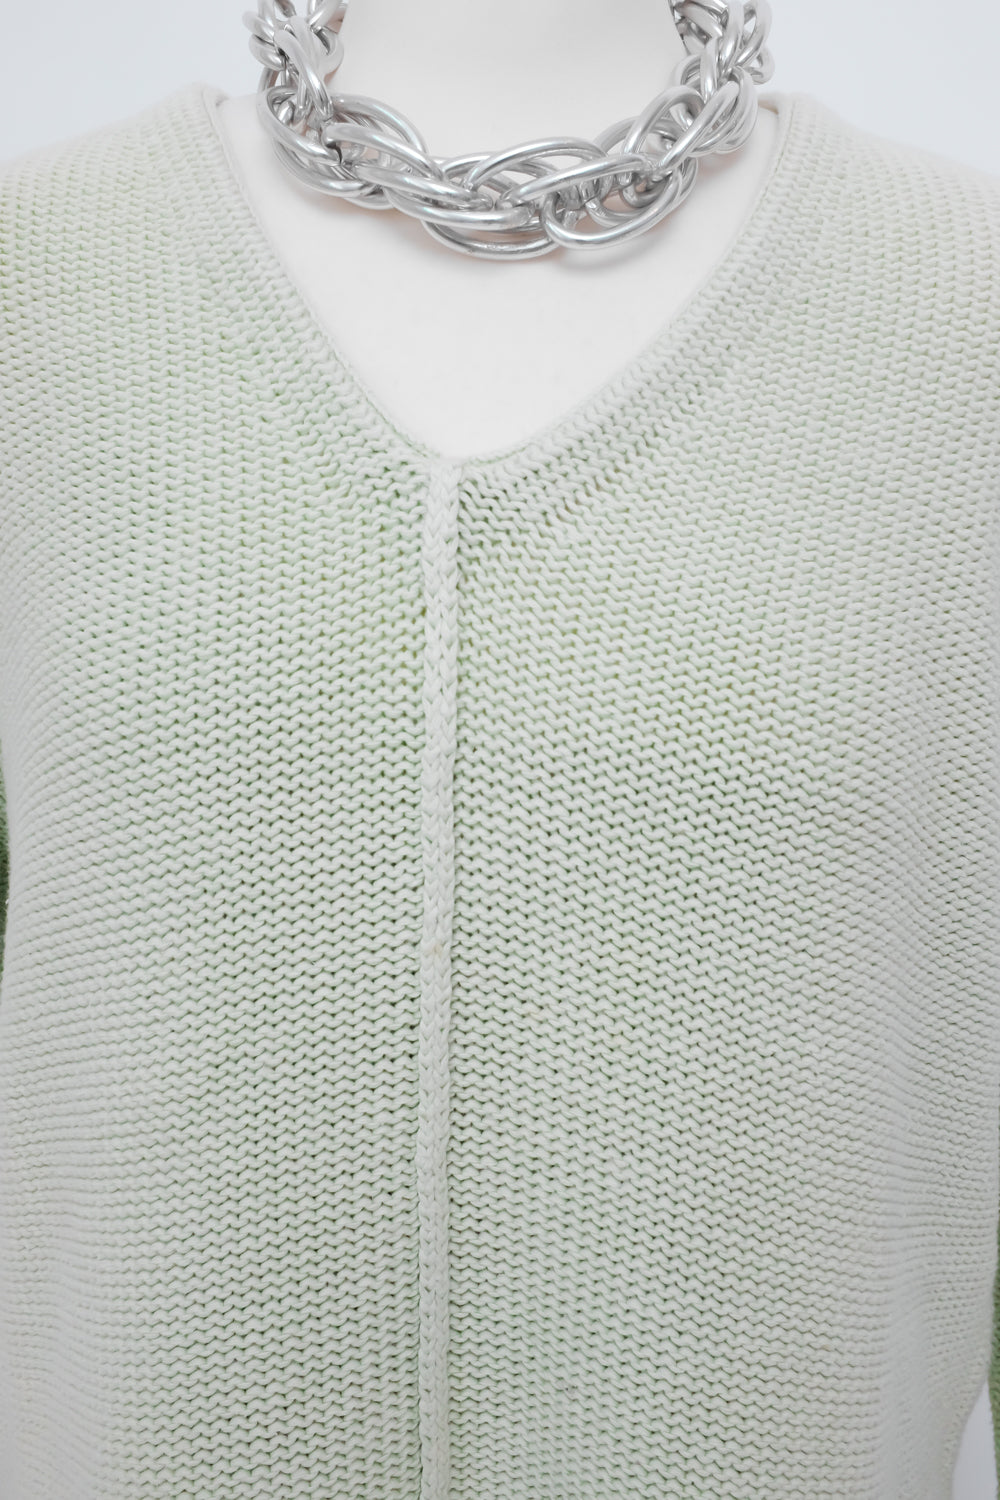 0058_LIME COTTON CHUNKY SWEATER